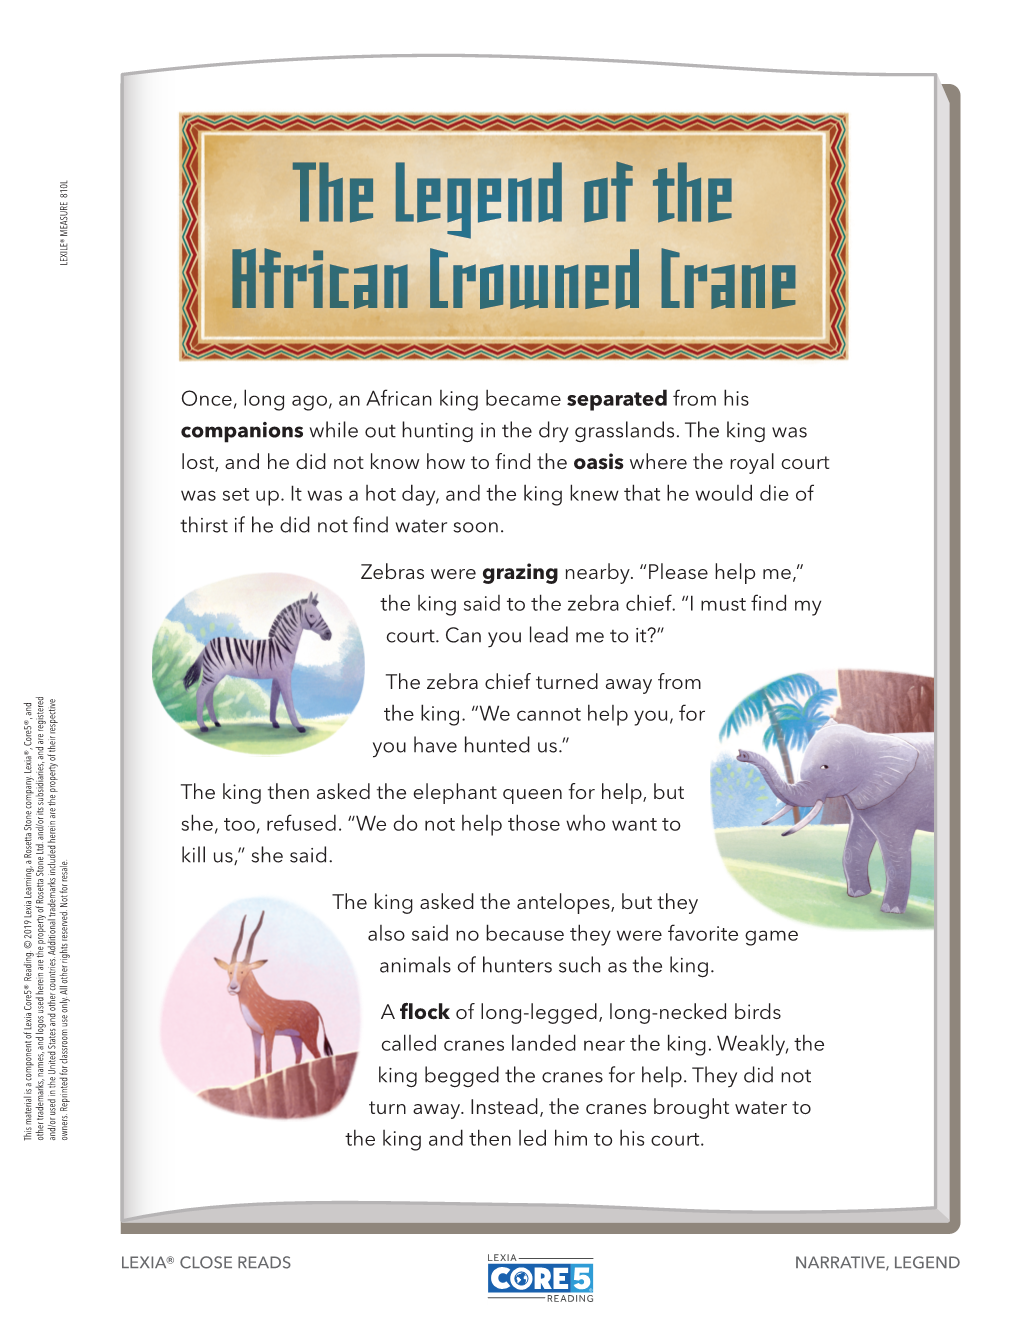 The Legend of the African Crowned Crane